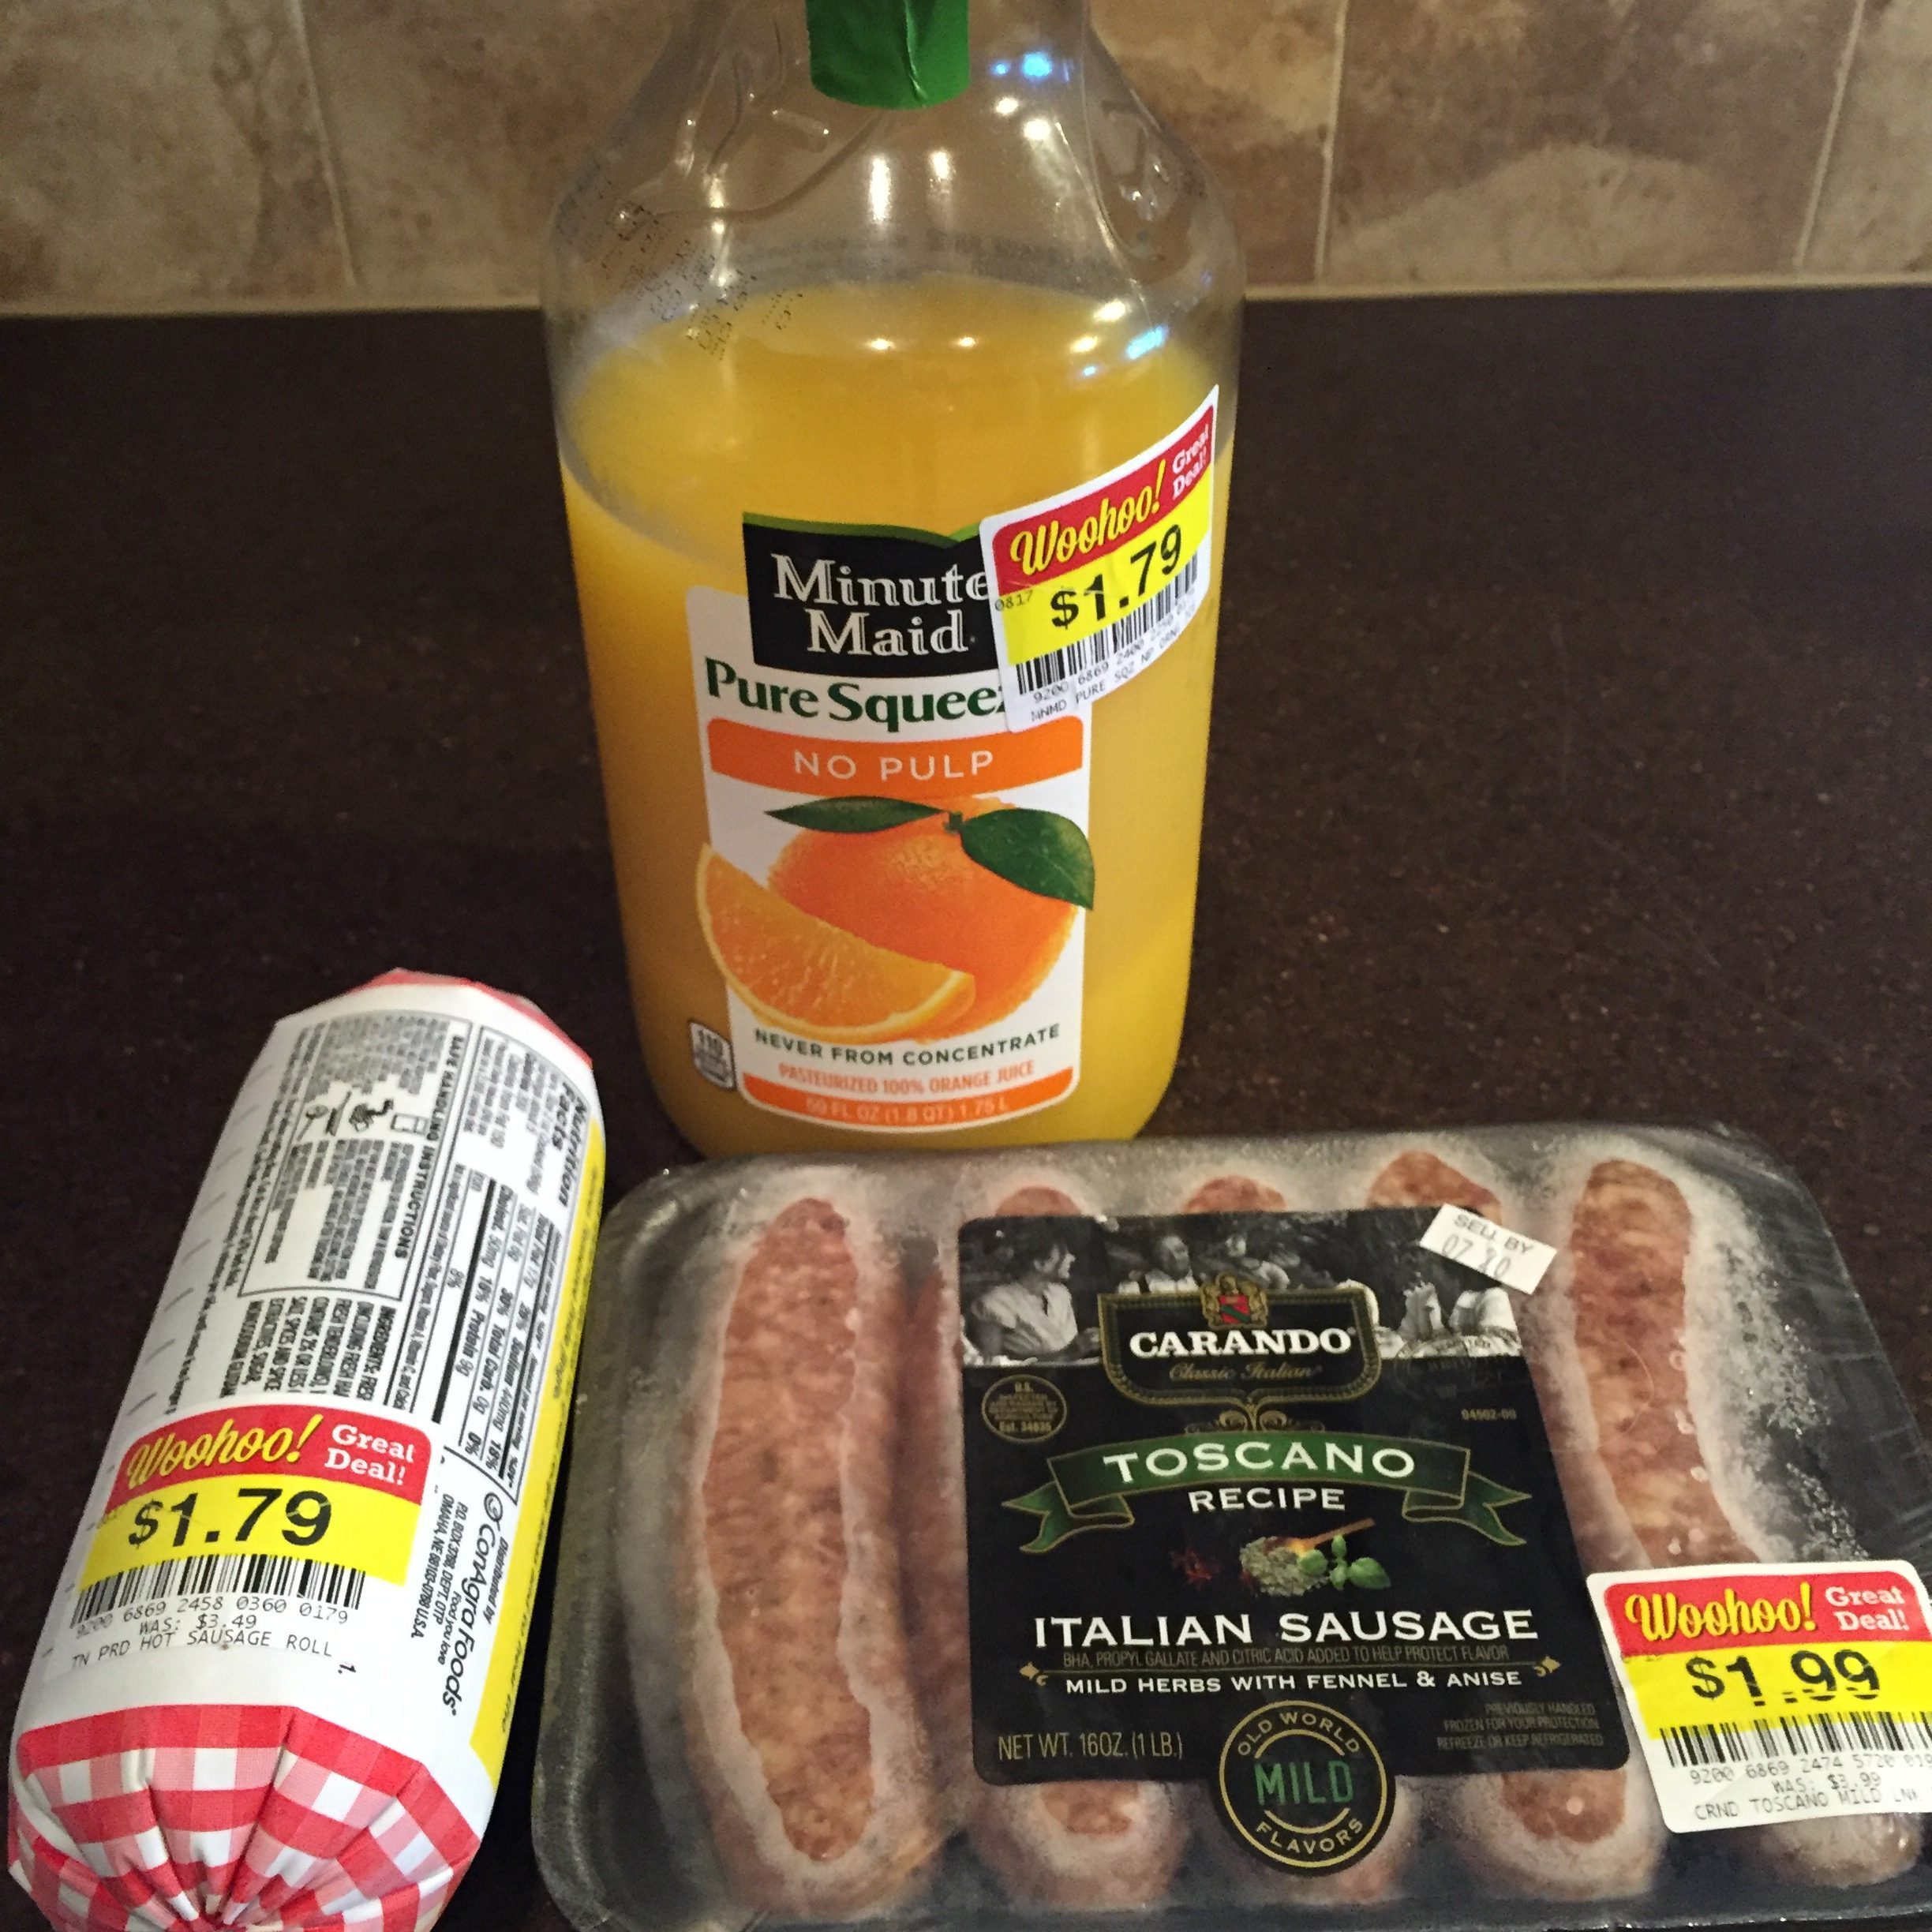 These link sausages are often regularly priced for 4.99 each. Score!